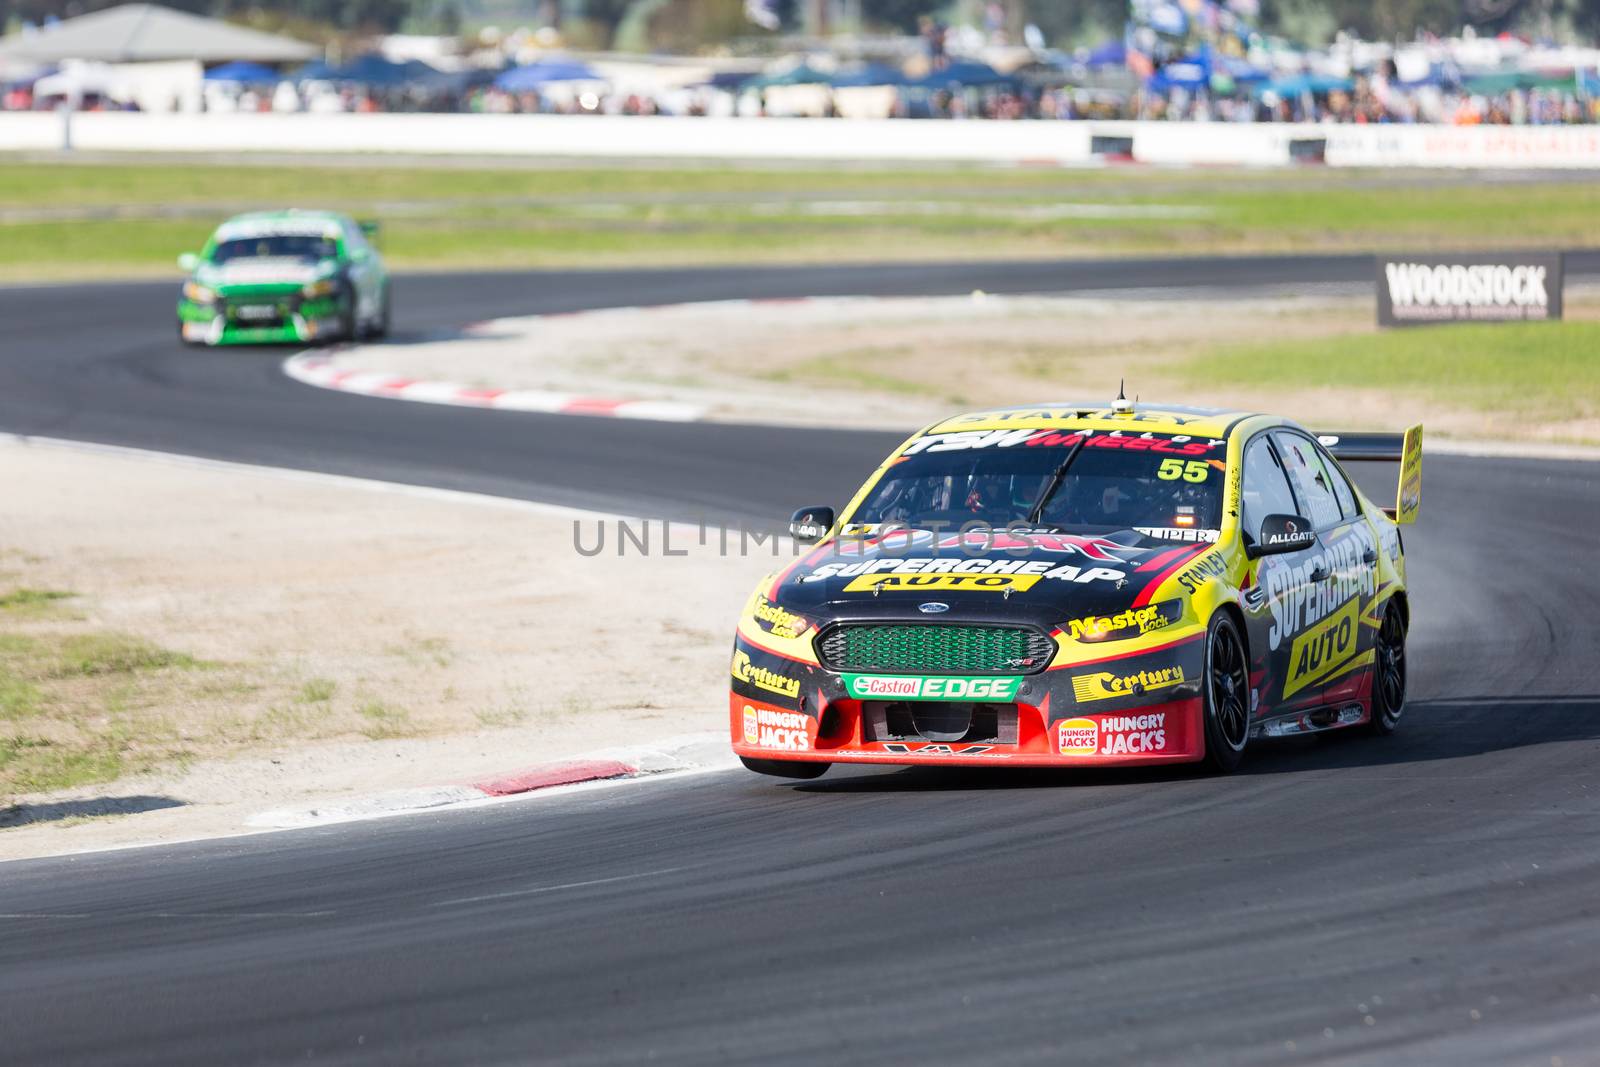 MELBOURNE, WINTON/AUSTRALIA, 22 MAY , 2016: Virgin Australia Supercars Championship  - Chaz Mostert (Supercheap Auto Racing) during Qualifying at Winton.